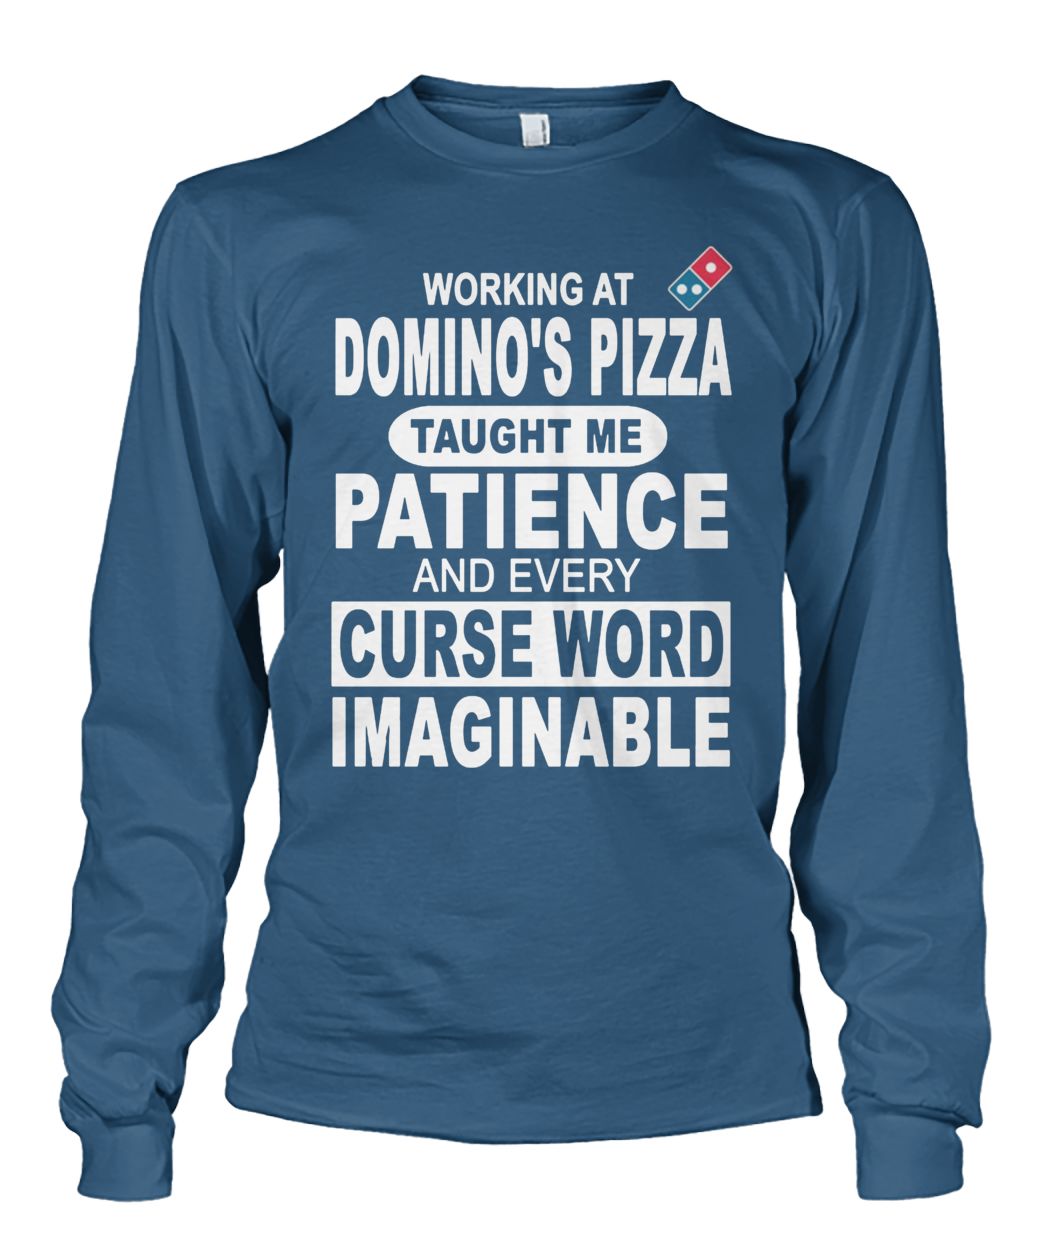 Working at domino's pizza taught me patience and curse word imaginable unisex long sleeve